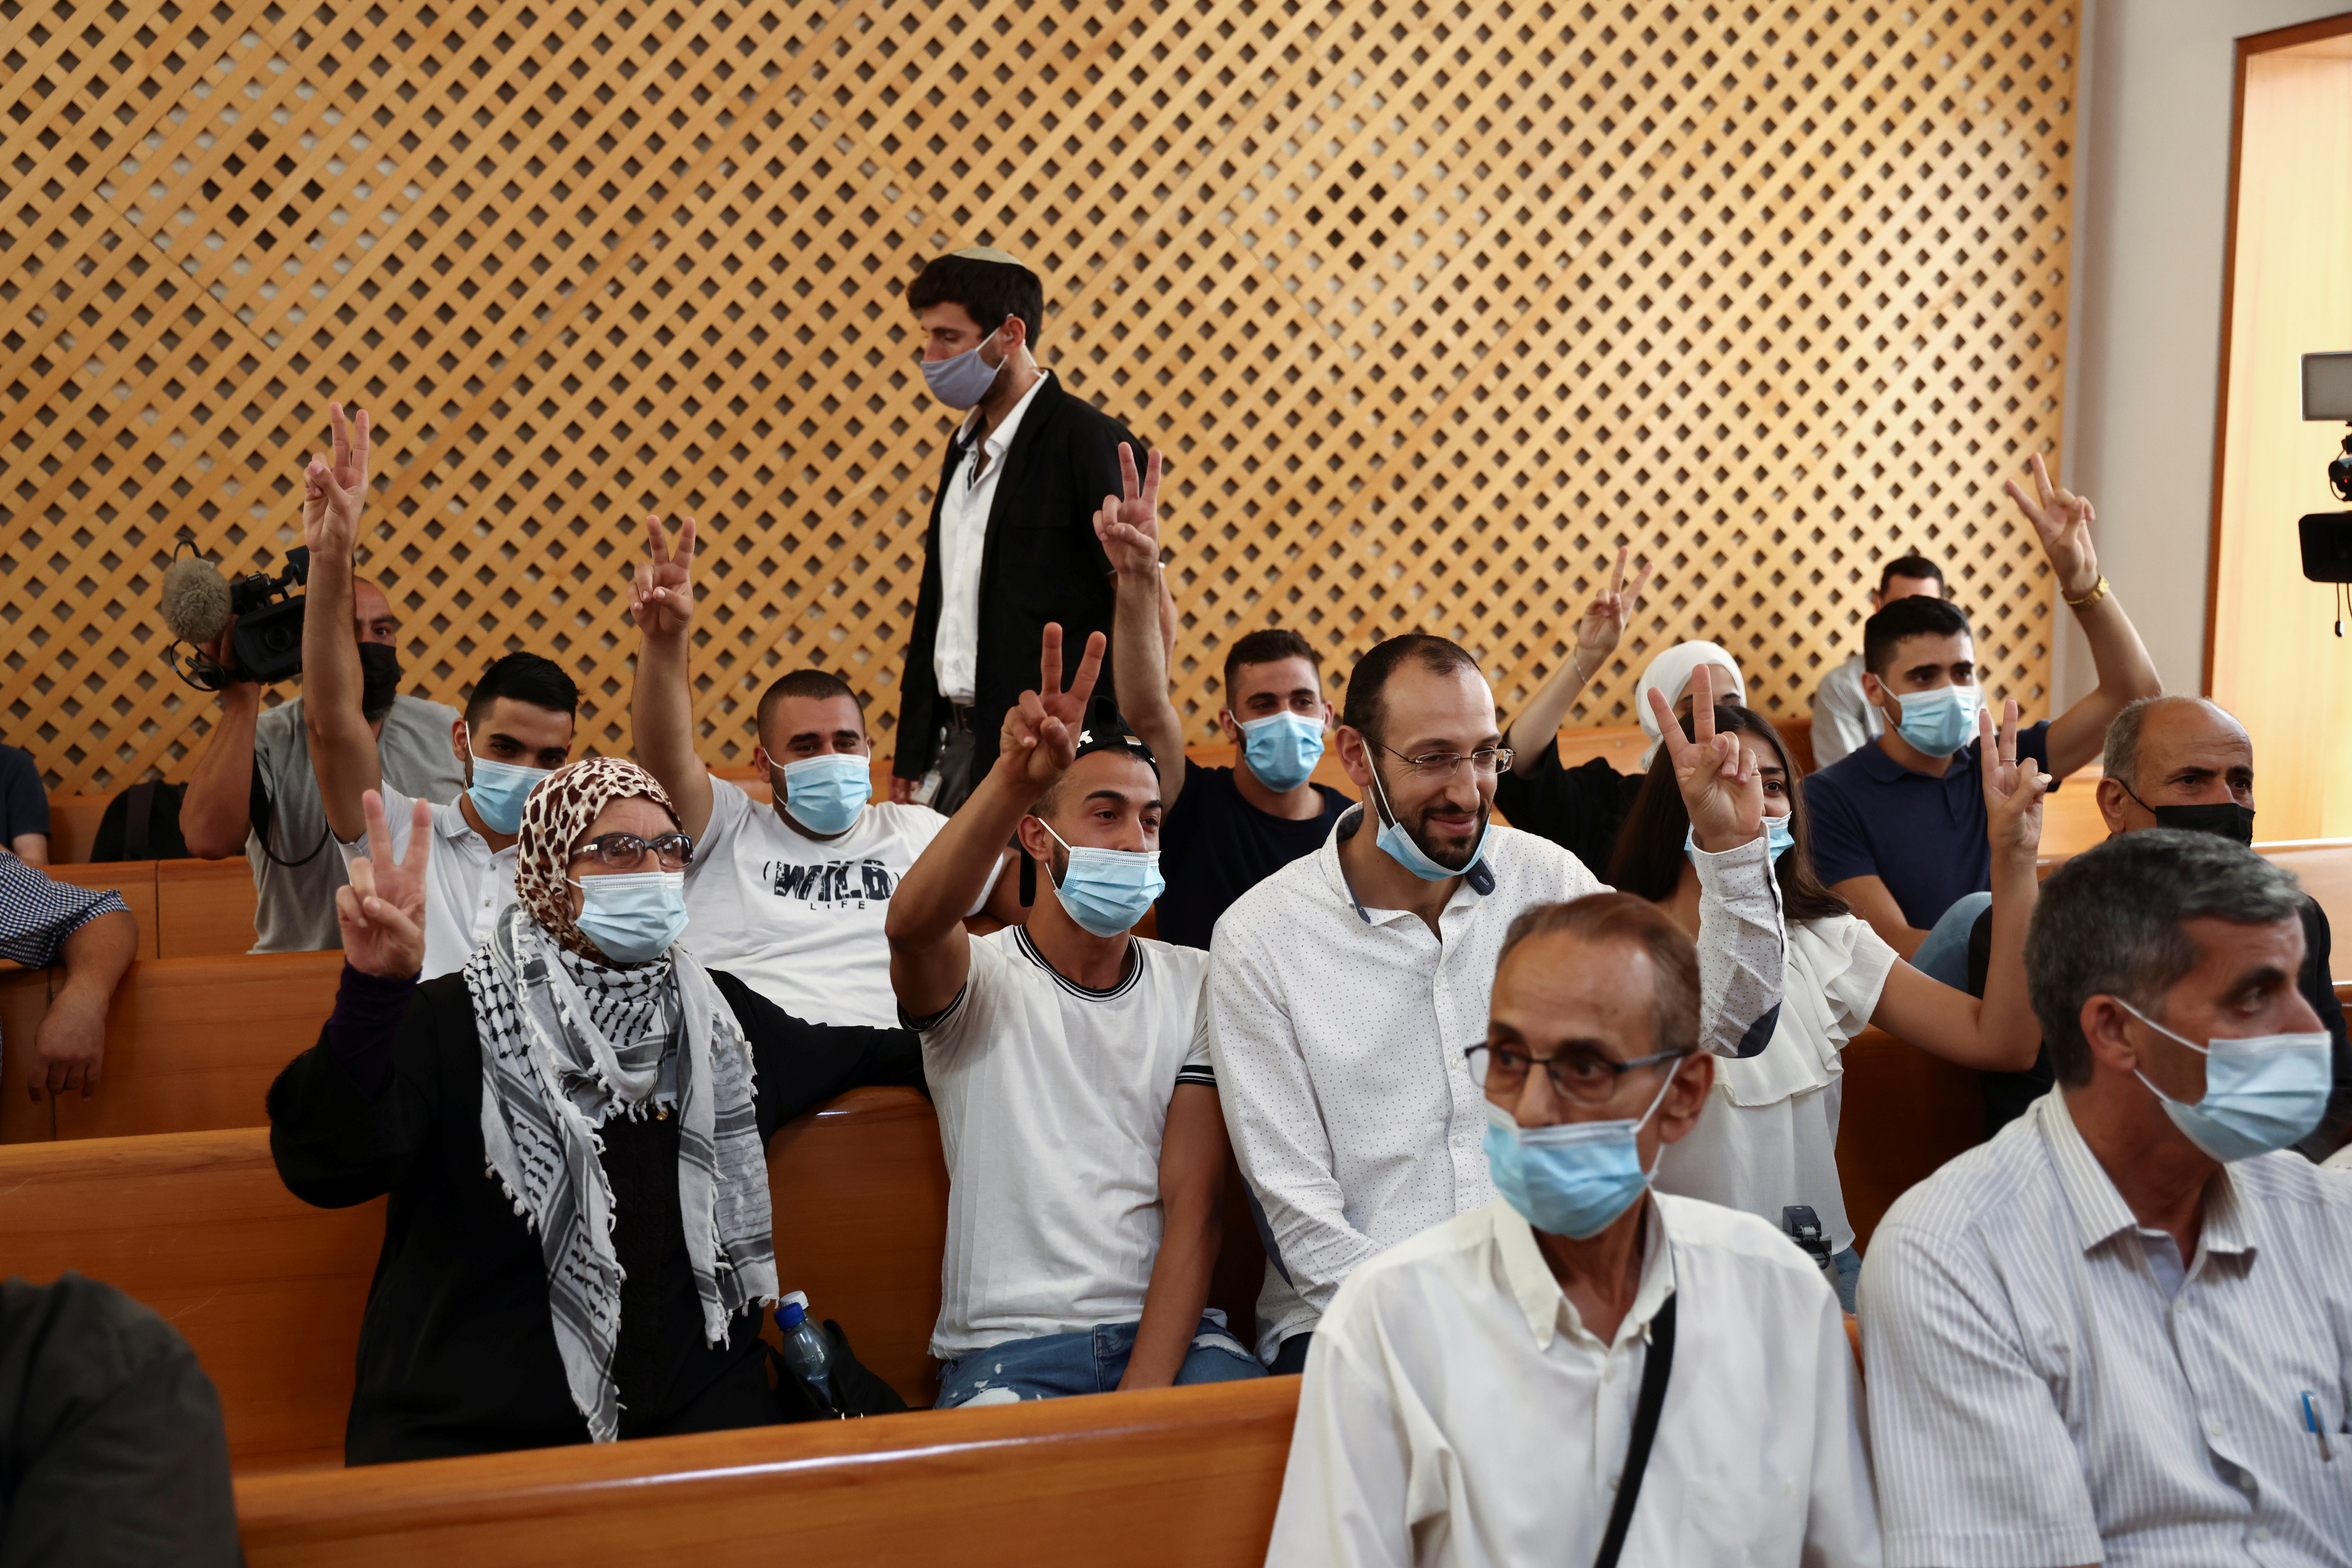 Members of the El-Kurd family, Palestinian residents of Sheikh Jarrah neighbourhood in East Jerusalem who are facing eviction, and a supporter of the family, flash victory signs during a court hearing, in the Israeli Supreme Court, in Jerusalem